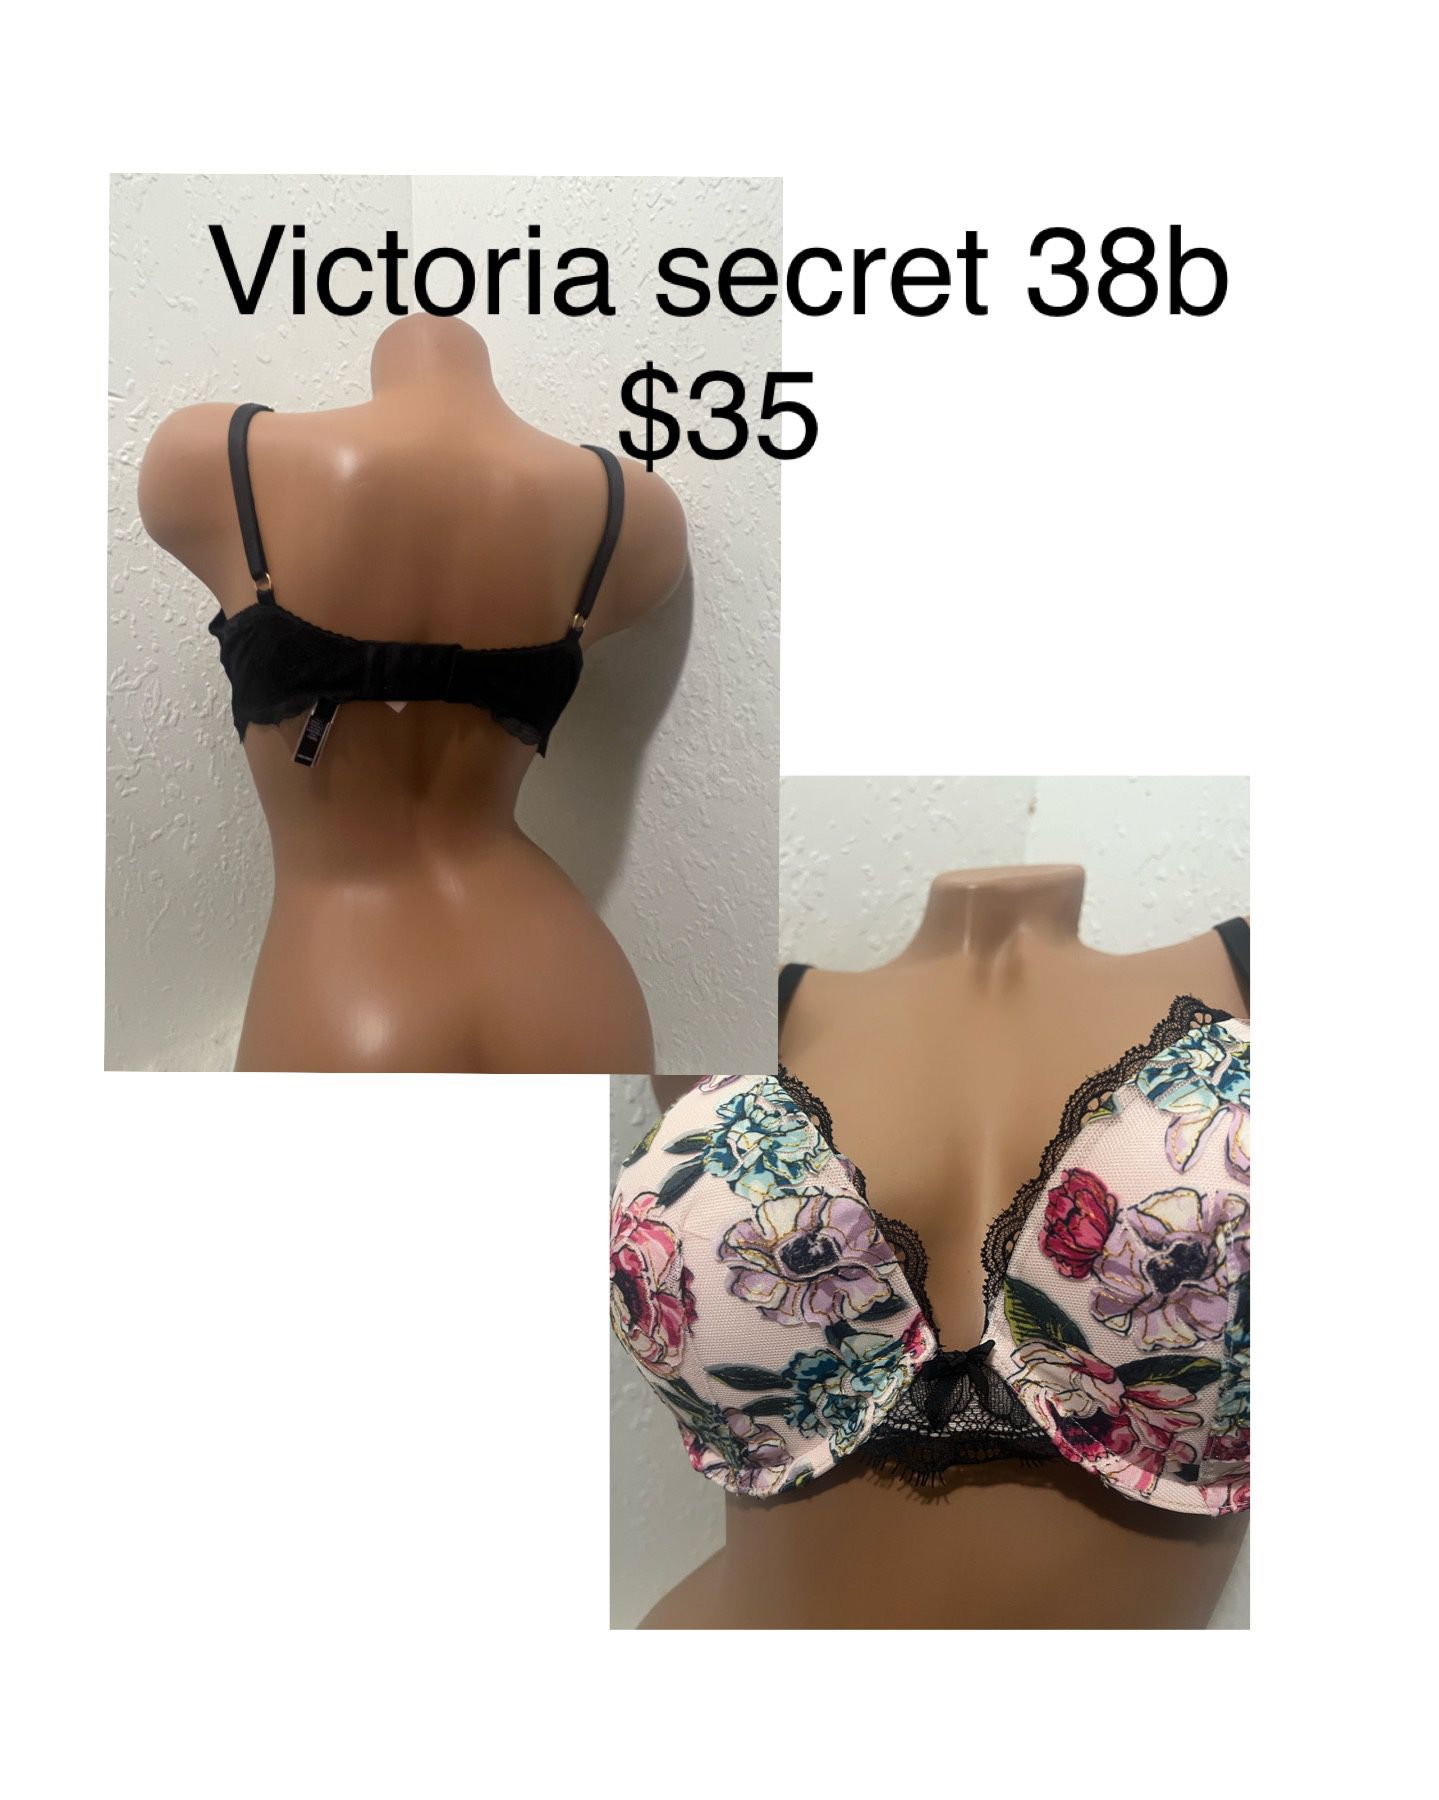 New Bra Victoria Secret 38b Push Up firm Price No Offers for Sale in Los  Angeles, CA - OfferUp